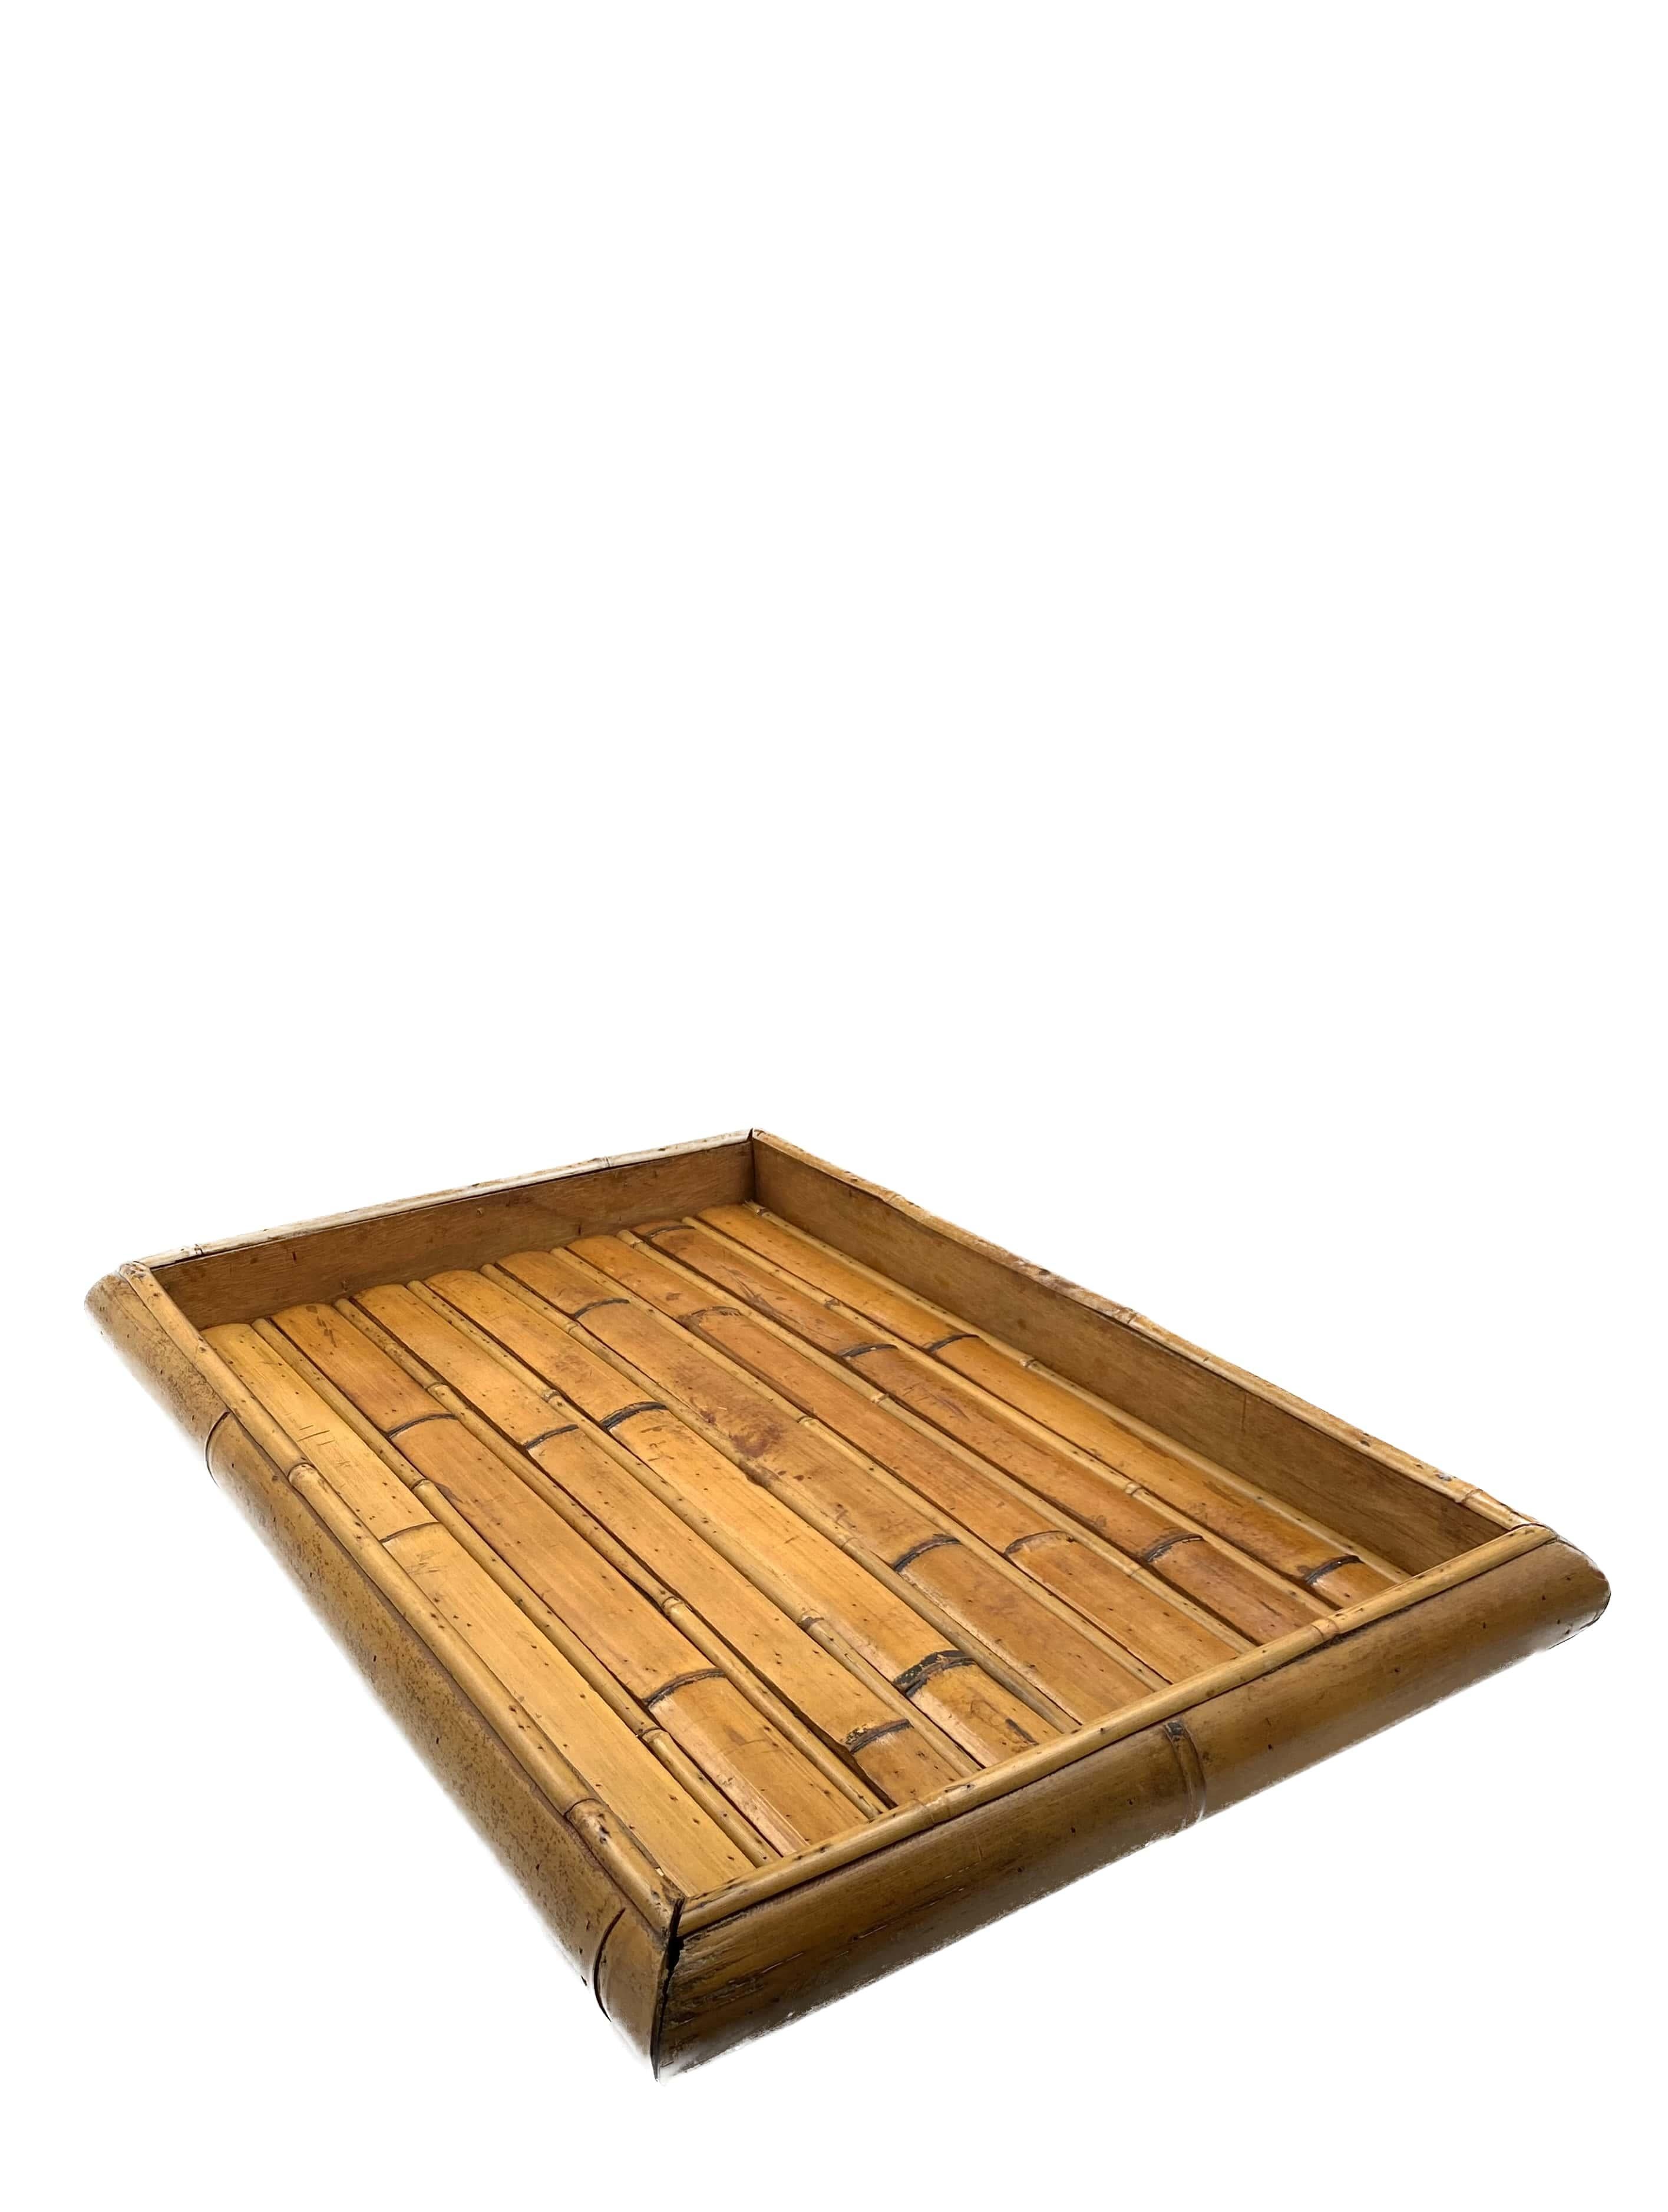 Hollywood regency great bamboo tray, Italy 1970s For Sale 4